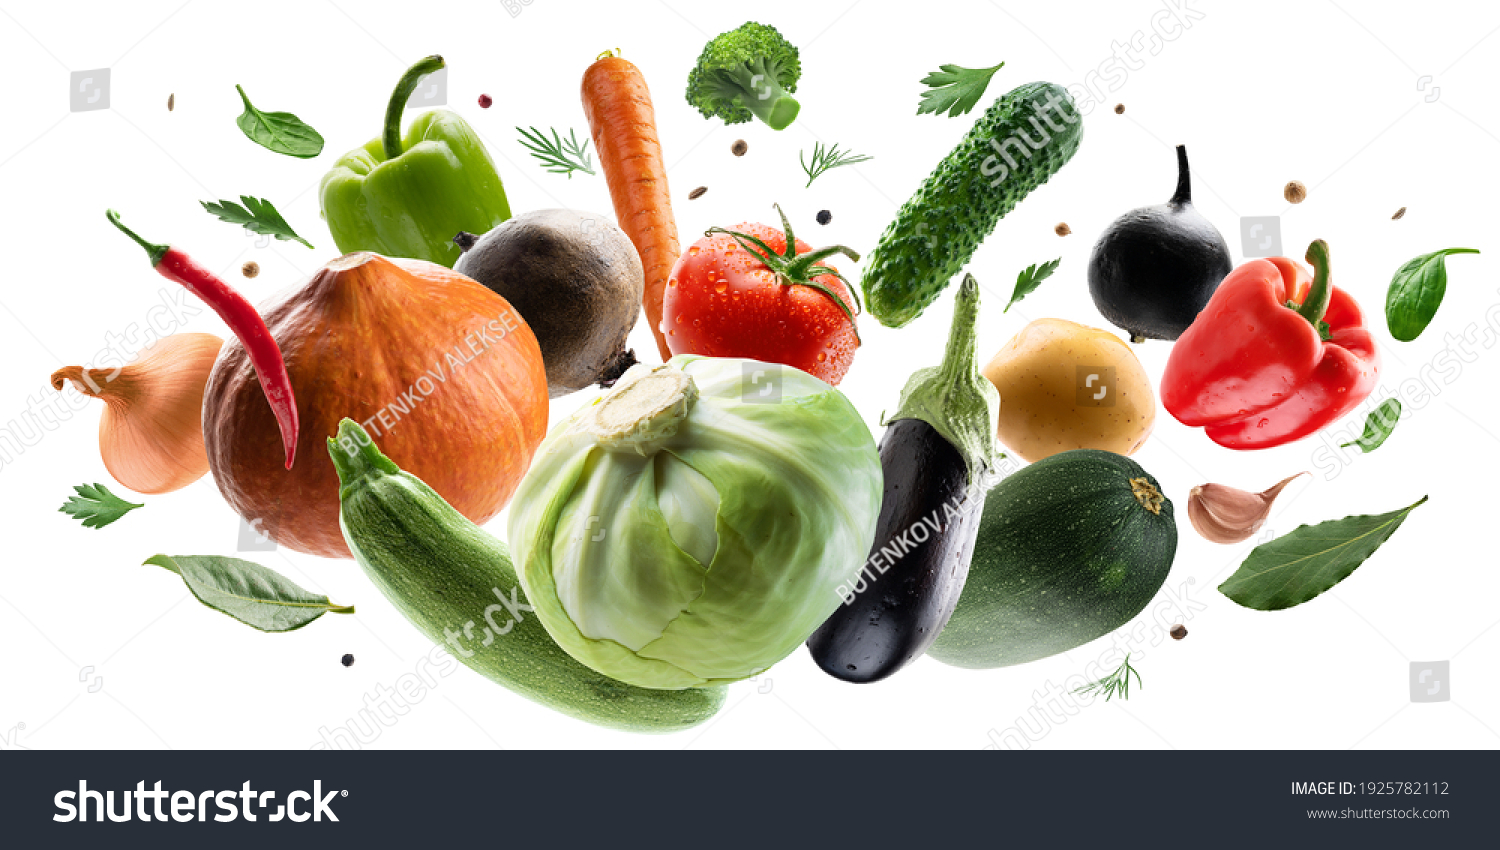 Large set of isolated vegetables on a white background #1925782112